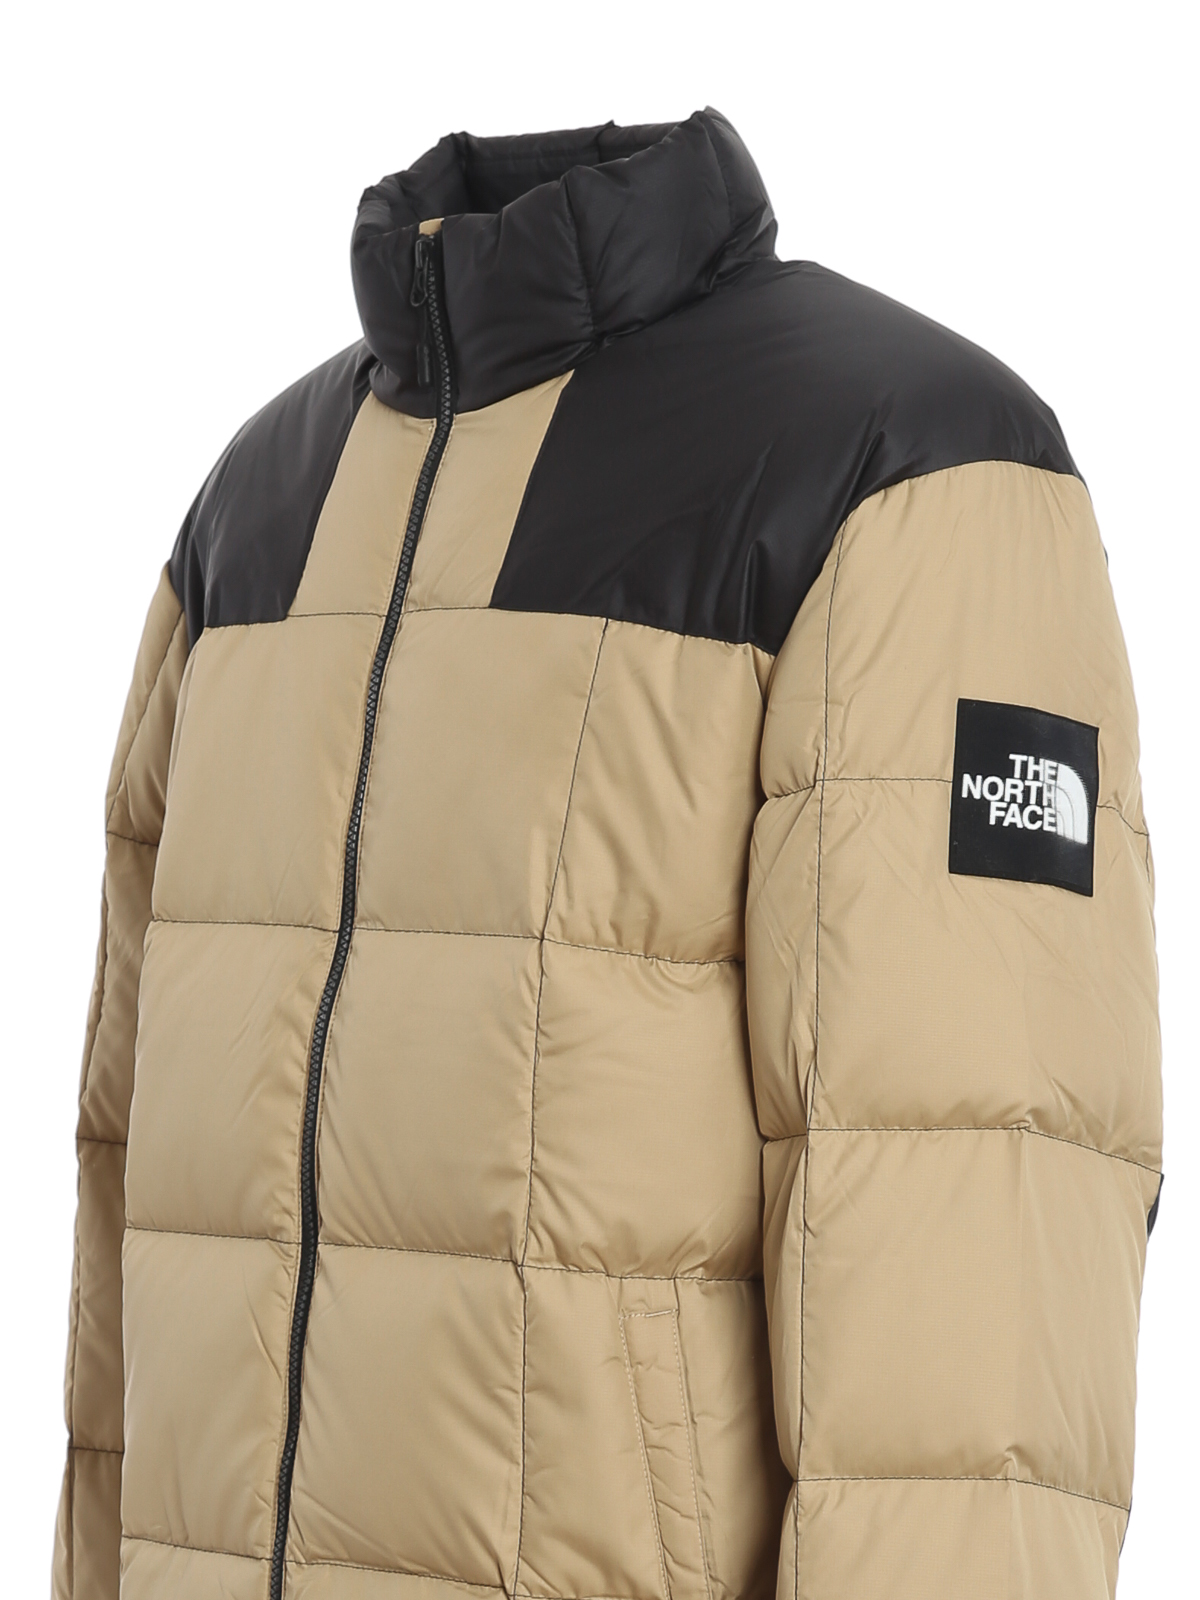 opstelling Habitat Alstublieft Padded jackets The North Face - Lhotse puffer jacket - NF0A3Y23H7E